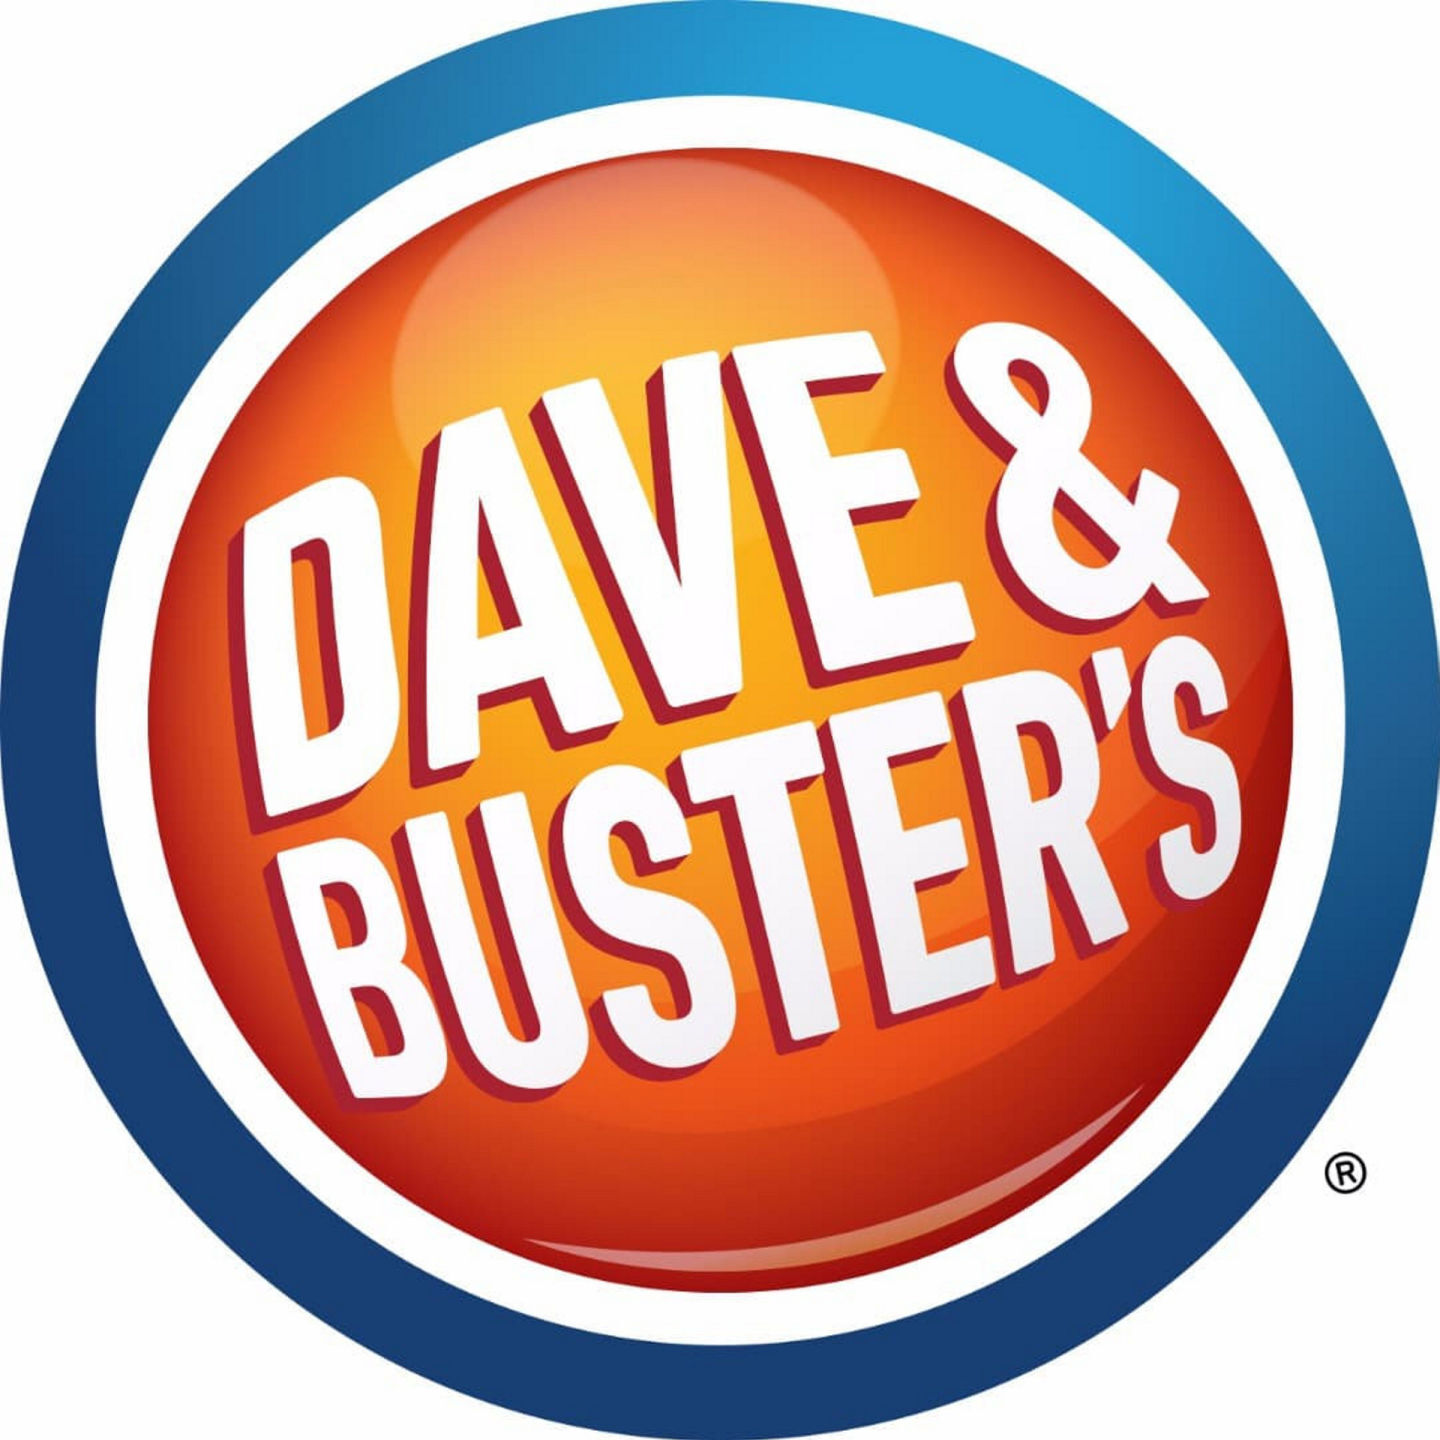 closest dave & buster's